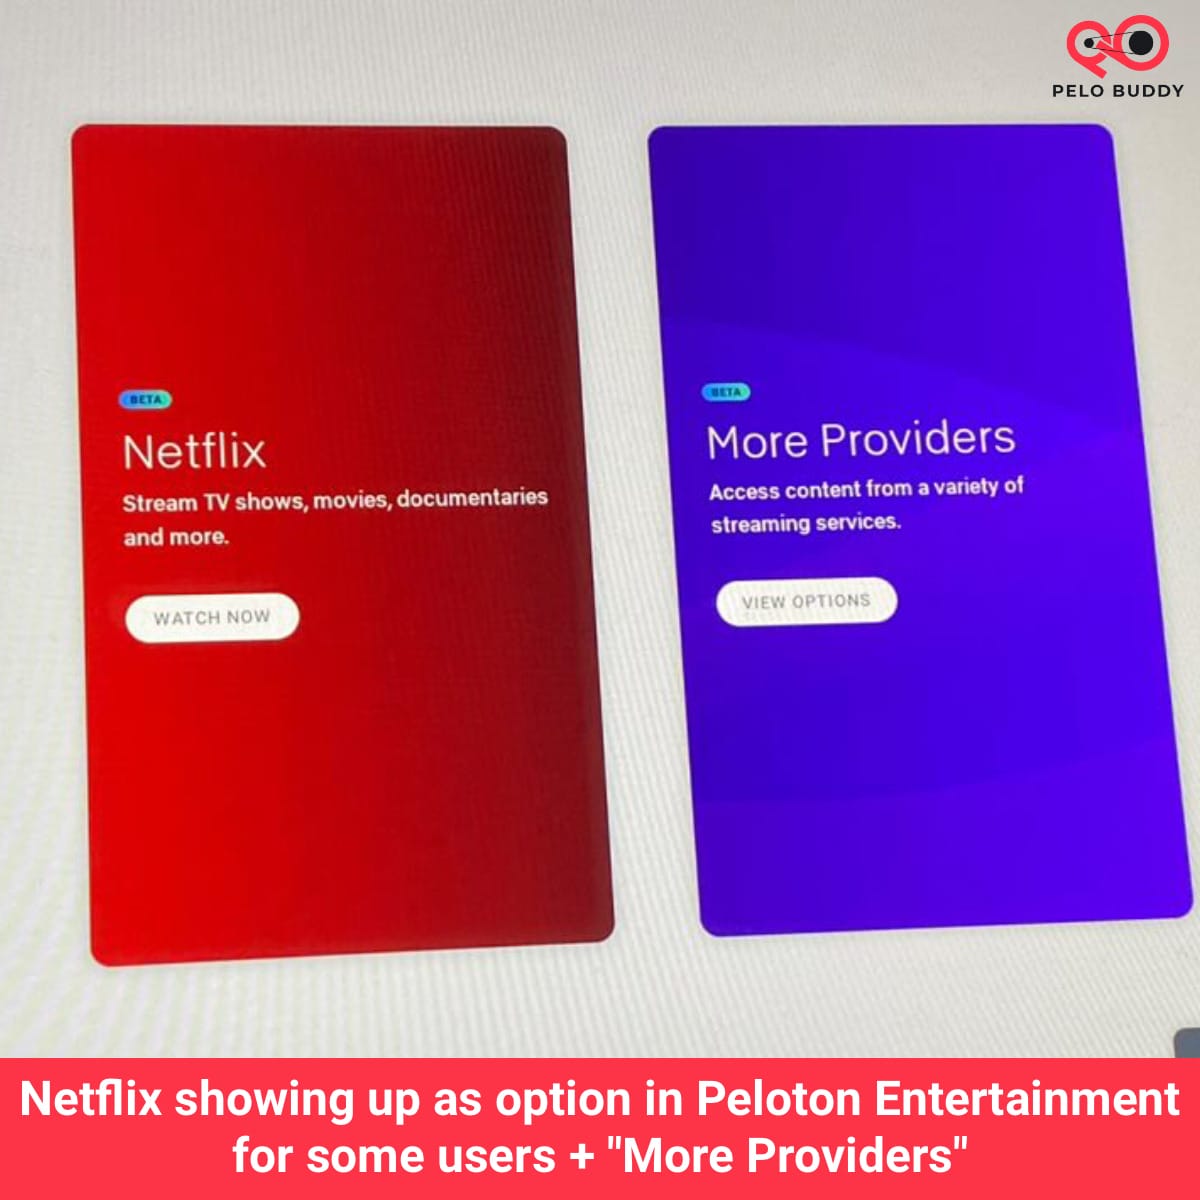 Netflix showing up as option in Peloton Entertainment for some users with a new layout (/